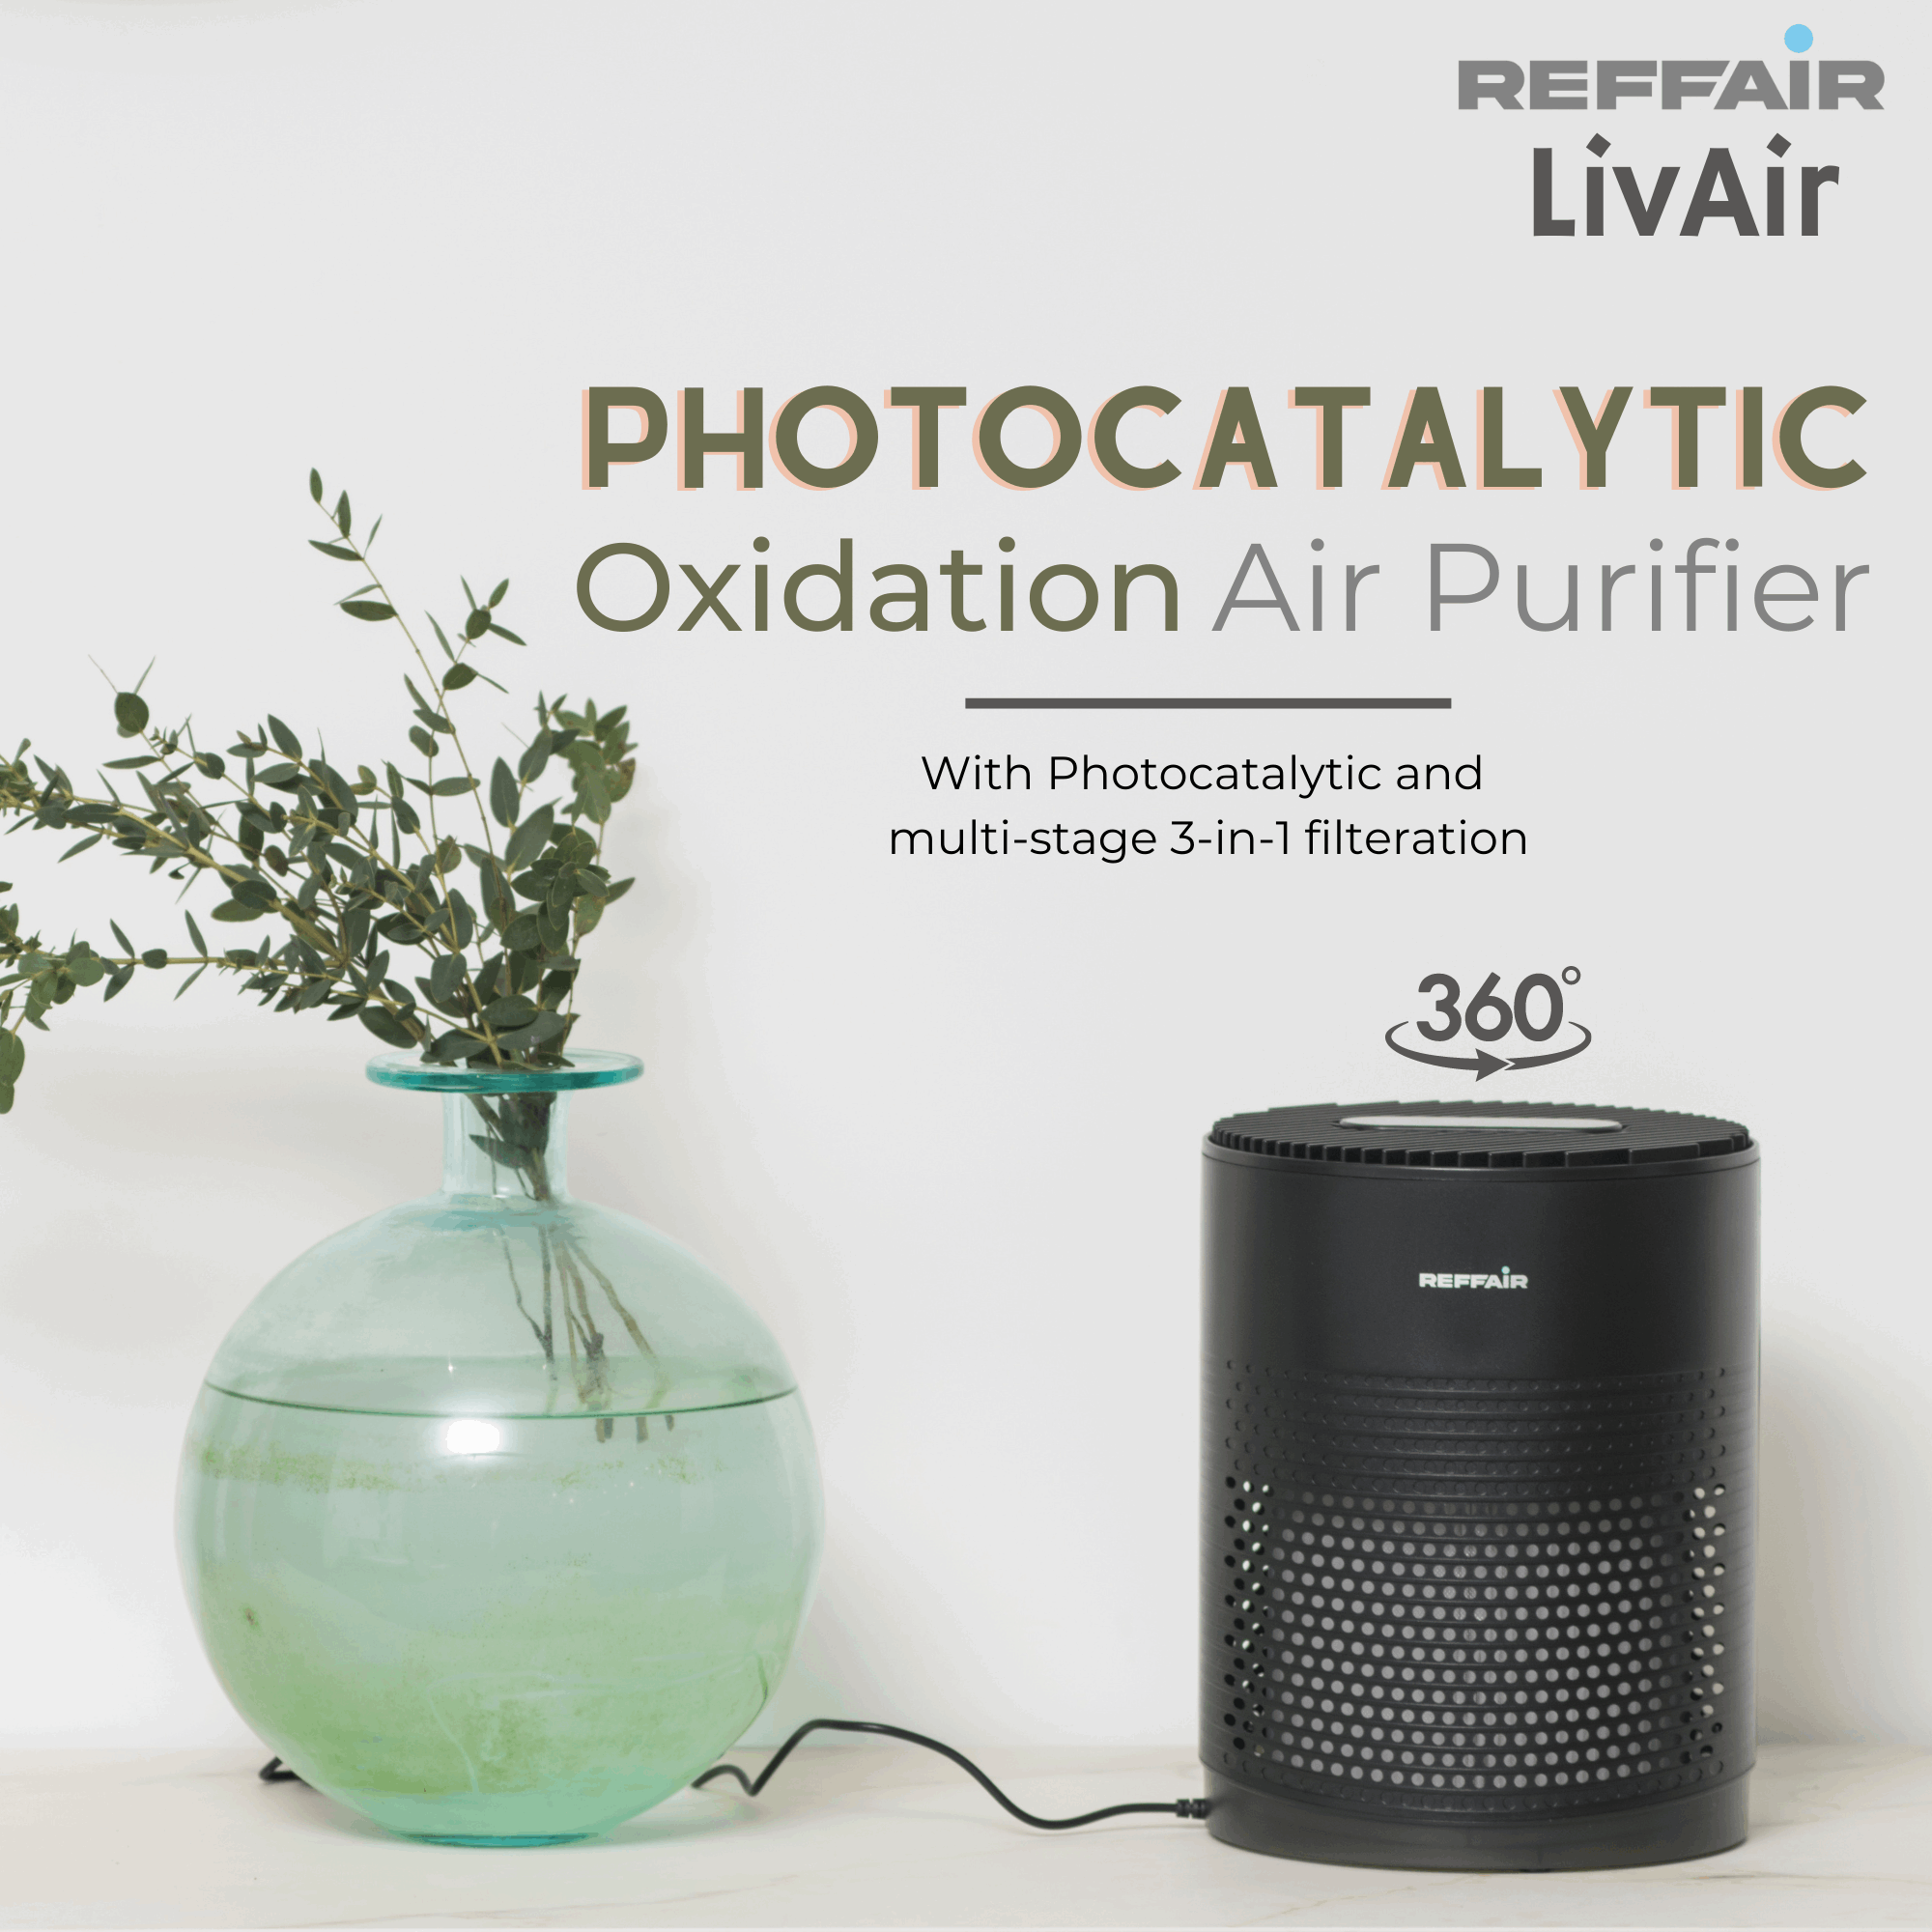 LivAir - Room Air Purifier for Home & Office | True HEPA Filter with Activated Carbon | Photocatalytic Filtration Technology with UV Function